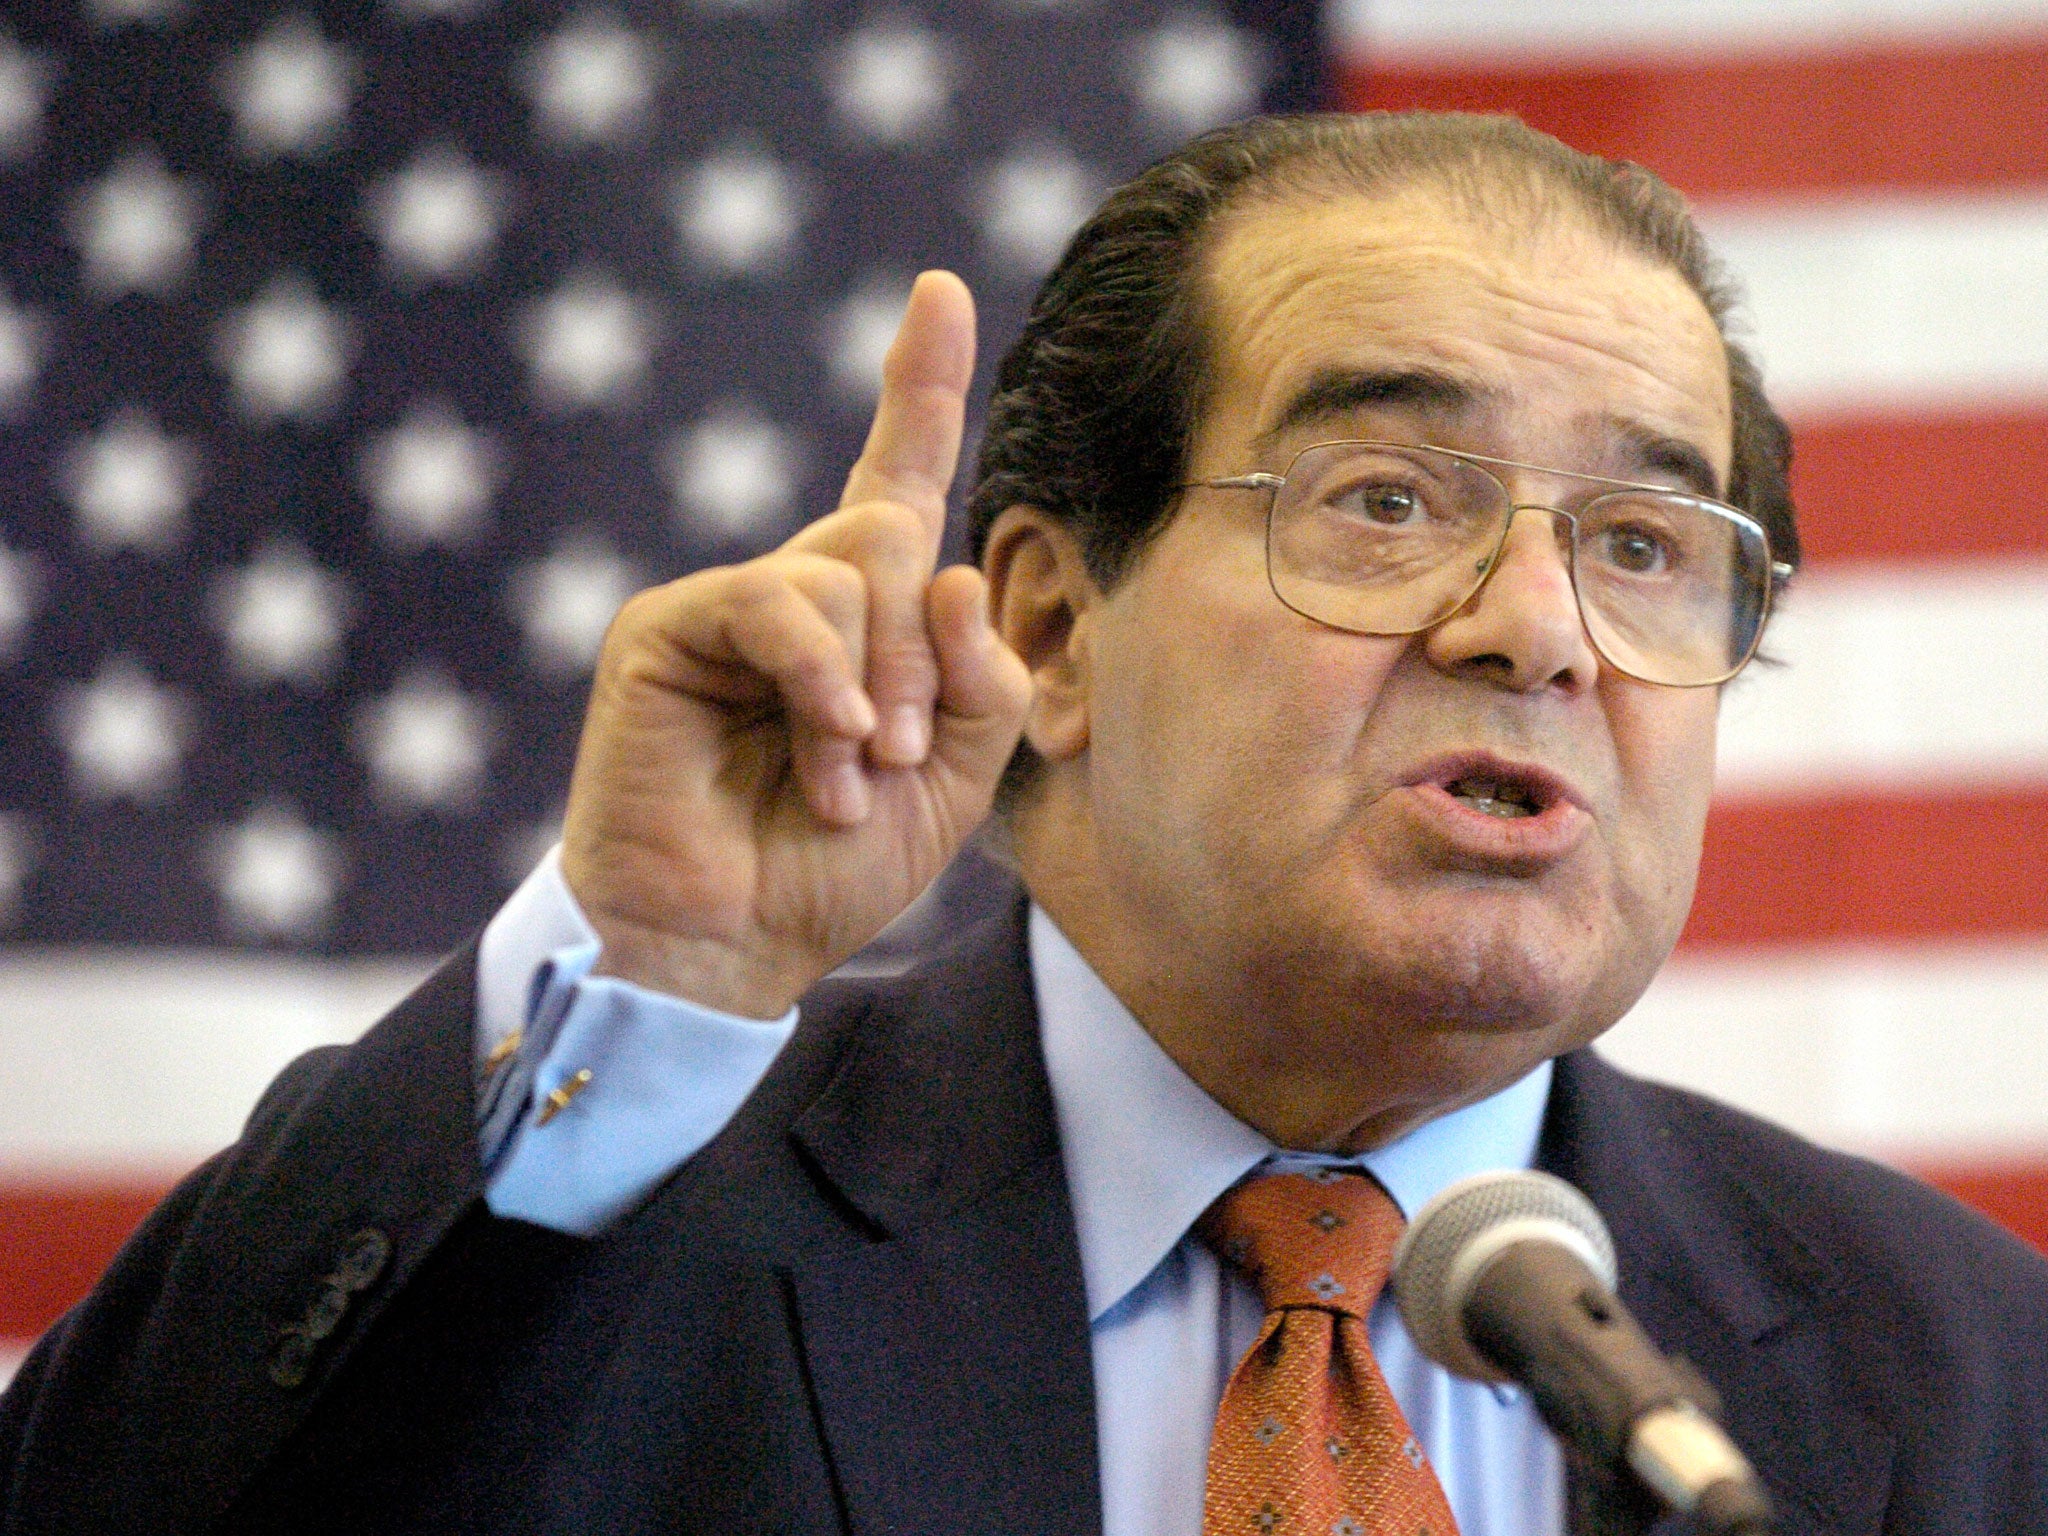 The Supreme Court Justice Antonin Scalia, nominated by Ronald Reagan and known for judgments opposing gay marriage and Obama’s healthcare reforms, died on a quail hunting trip in Marfa, Texas